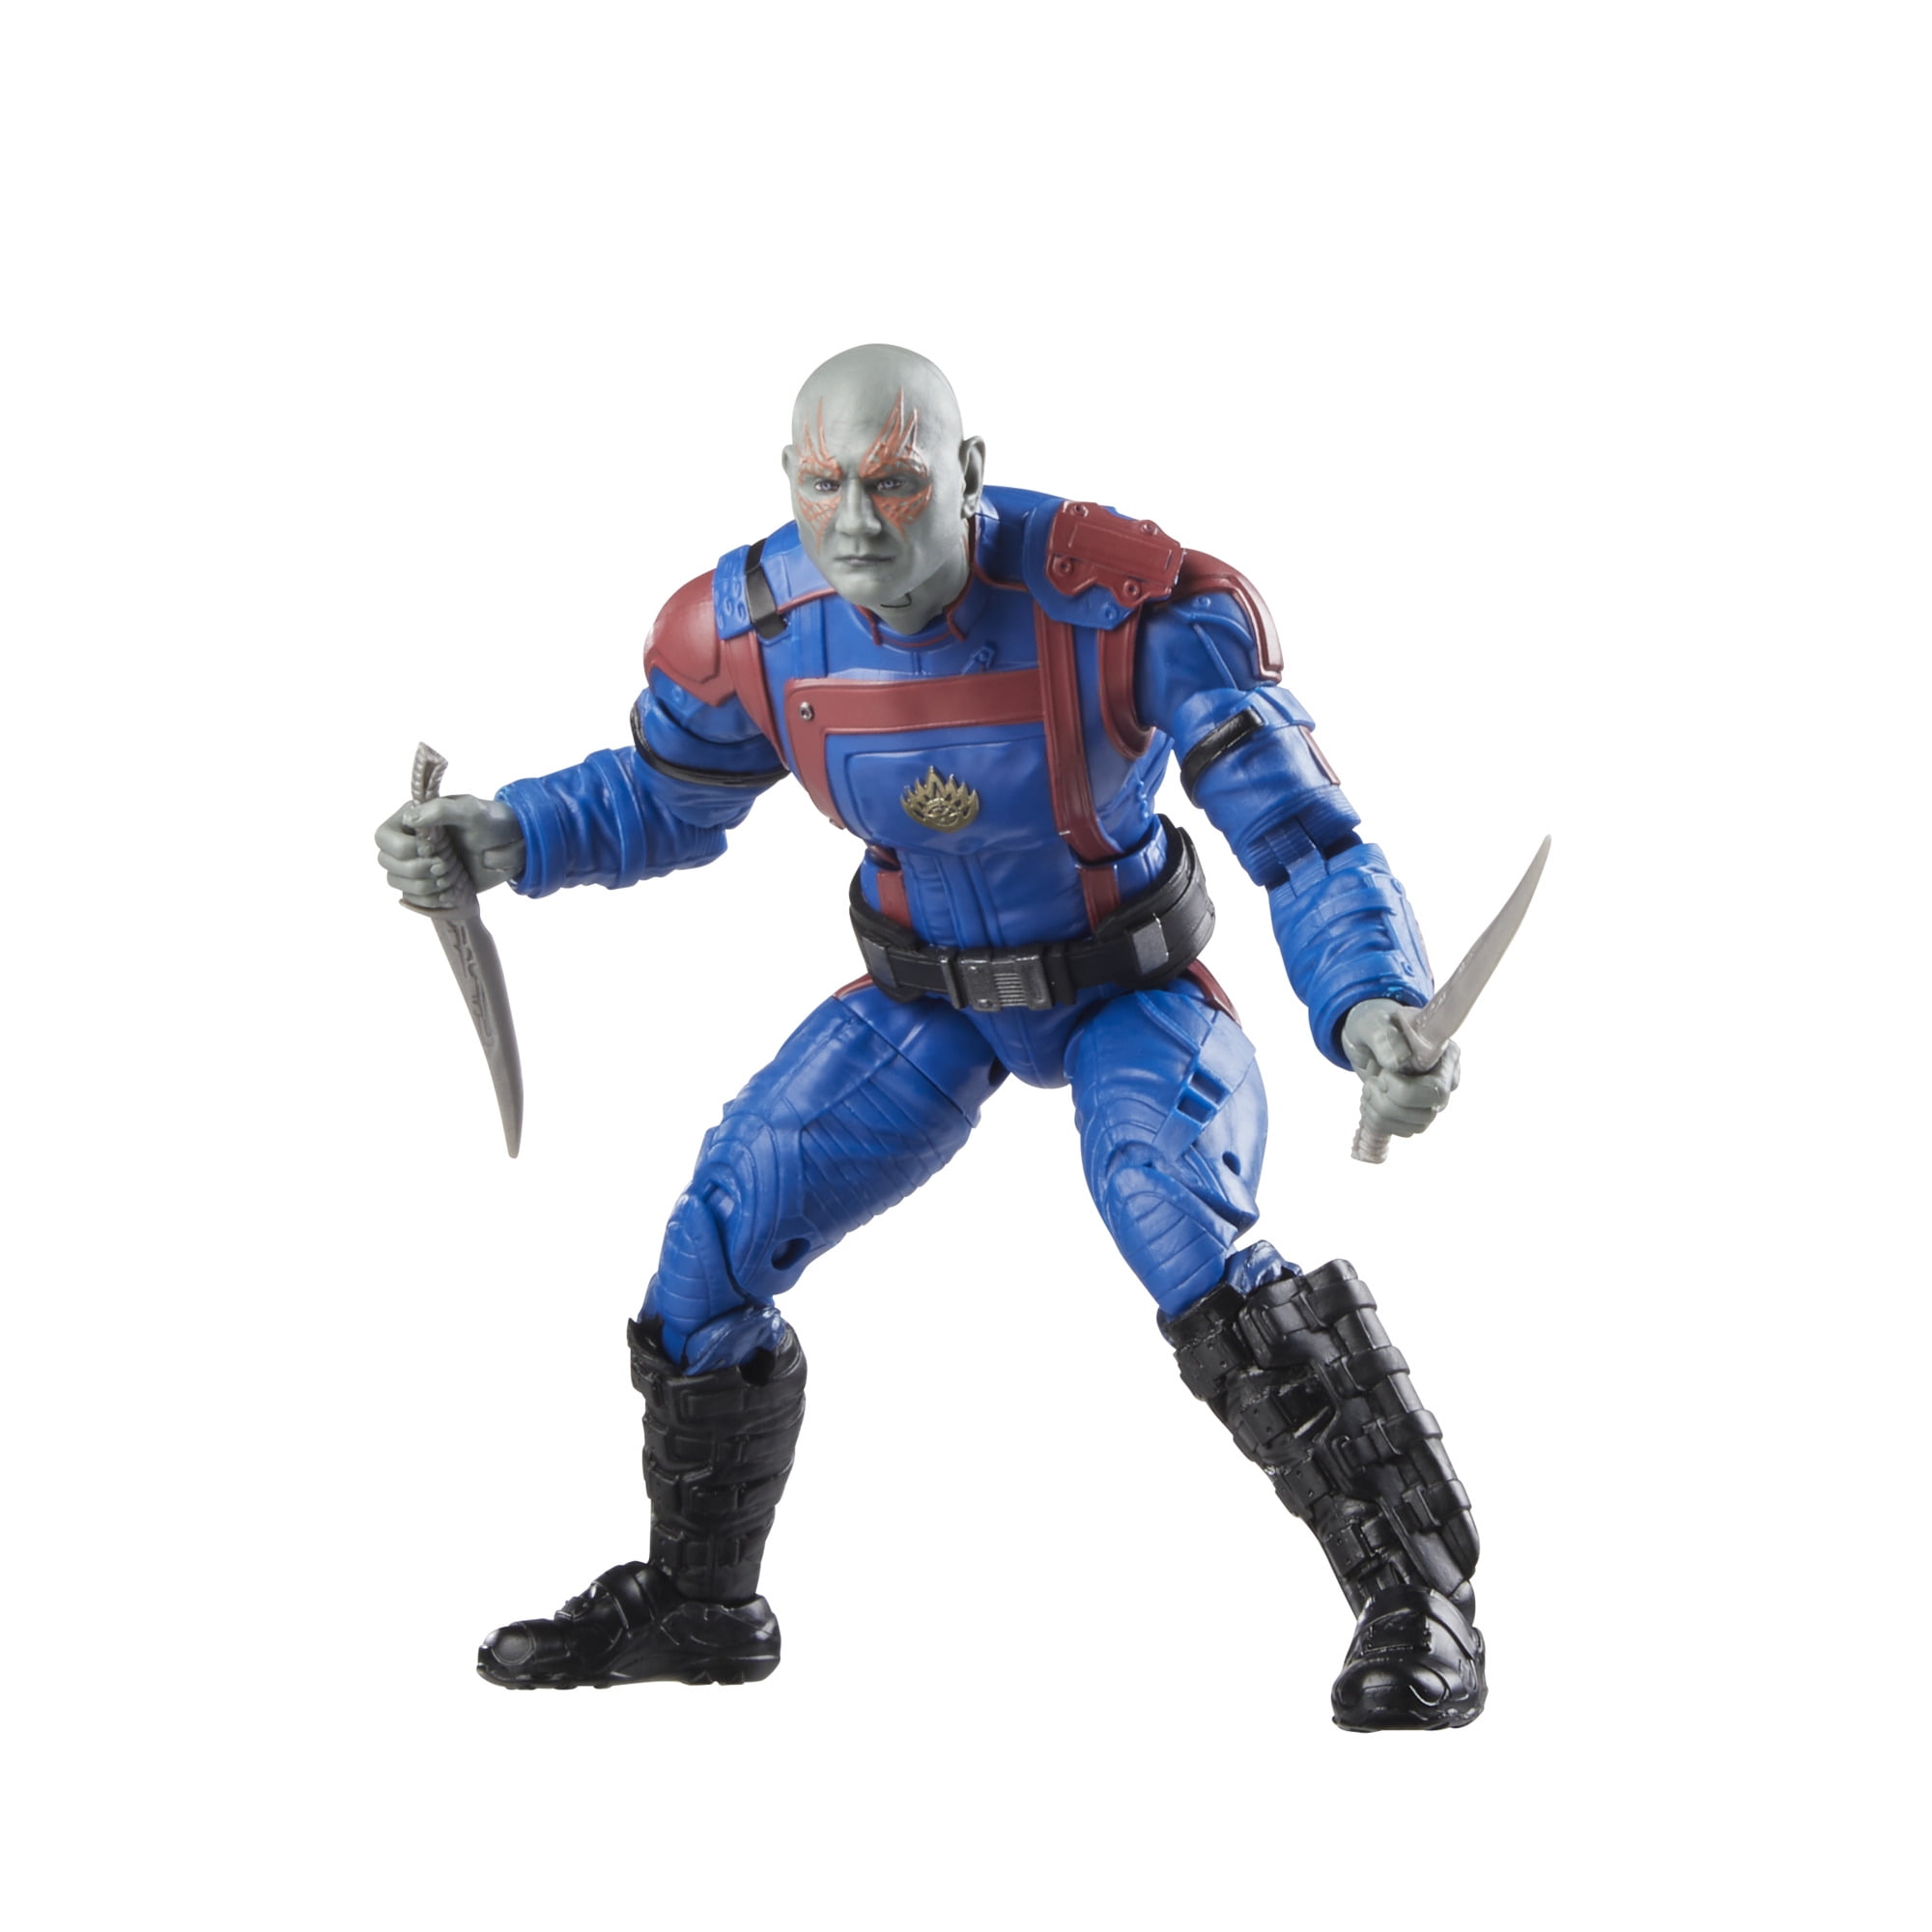 Marvel: Legends Guardians of the Galaxy Vol. 3 Drax Kids Toy